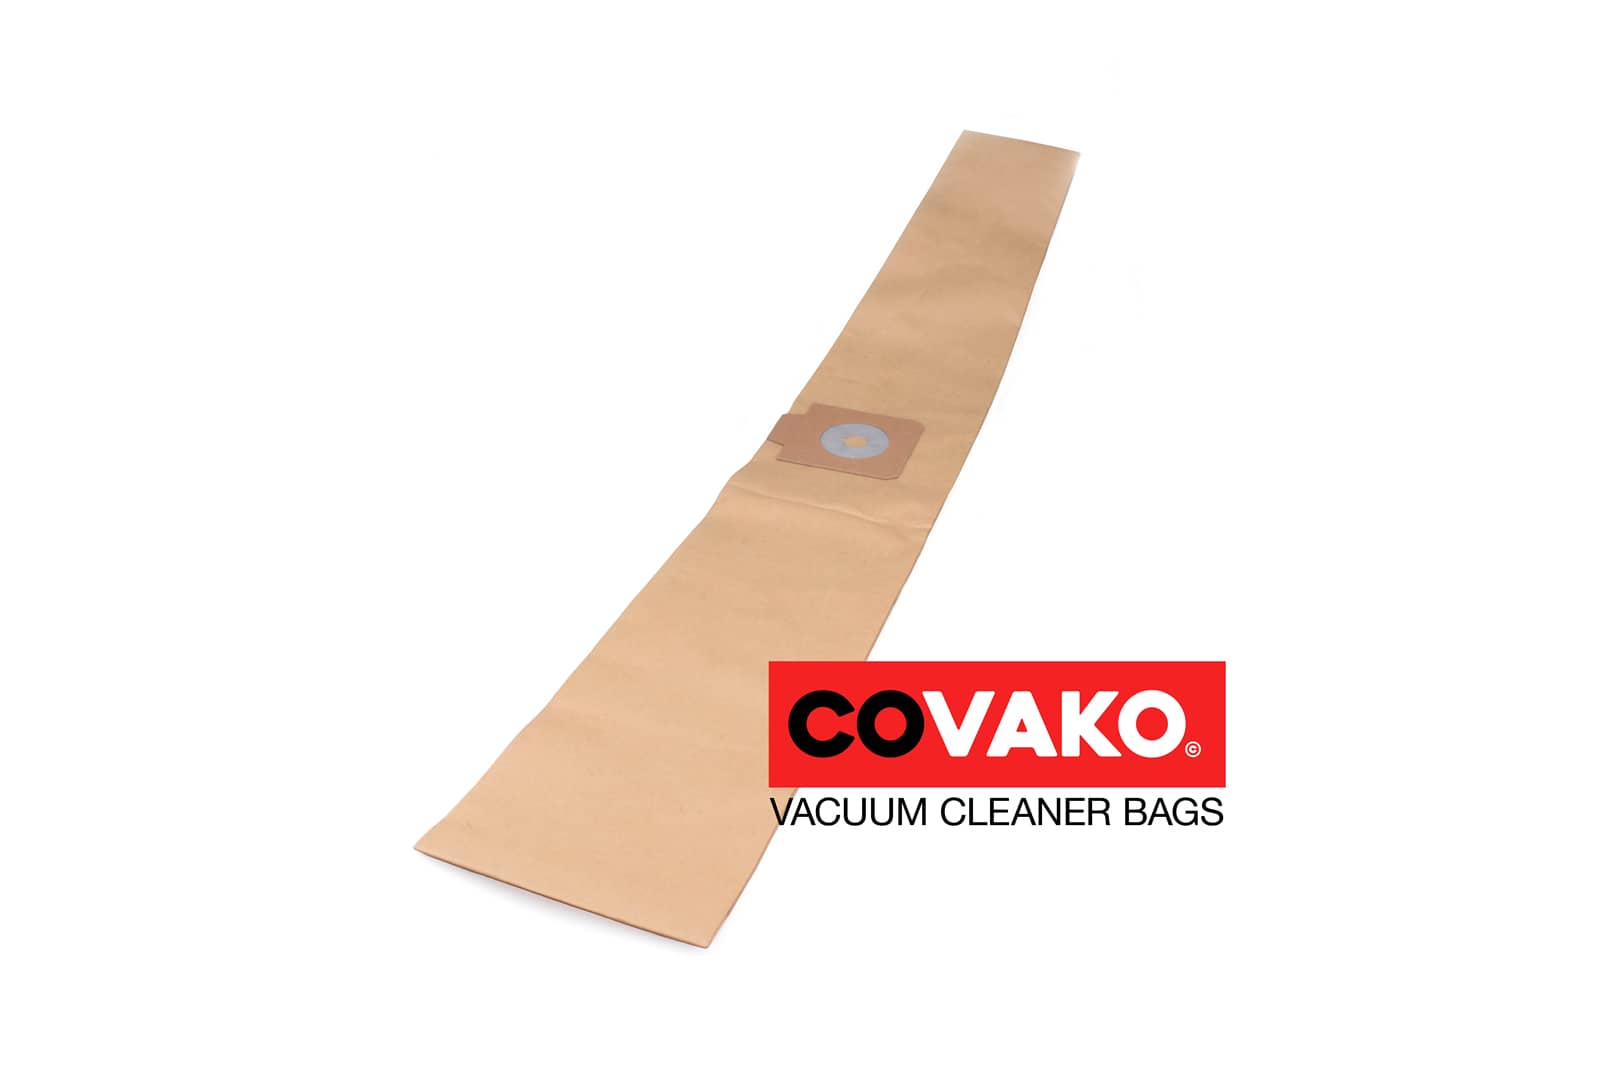 Alto GD 930 S2 Panther / Paper - Alto vacuum cleaner bags